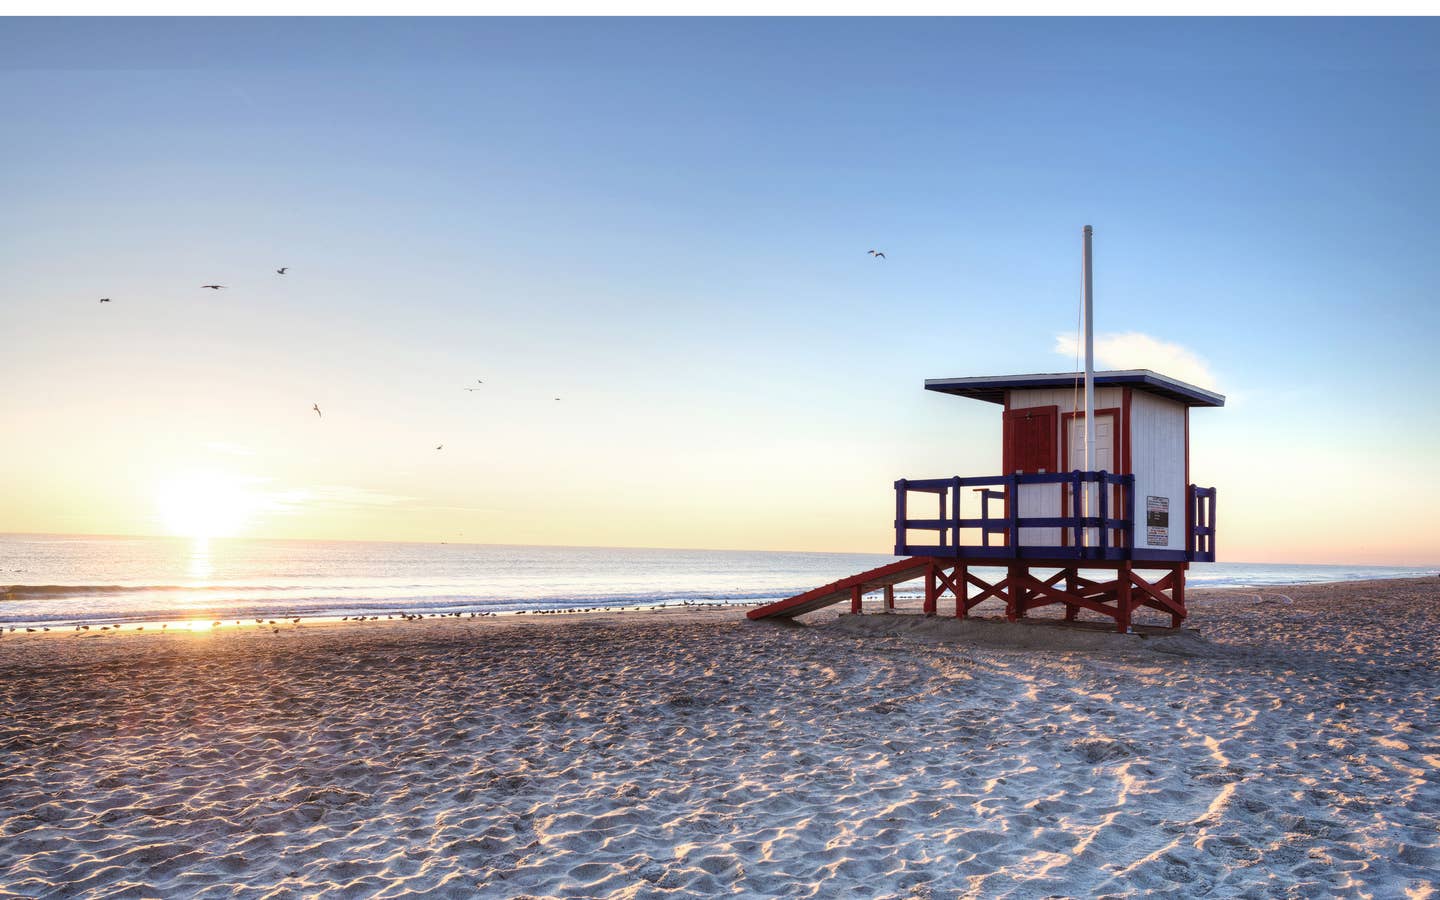 Cape Canaveral Beach with Lifeguard hut at sunset.